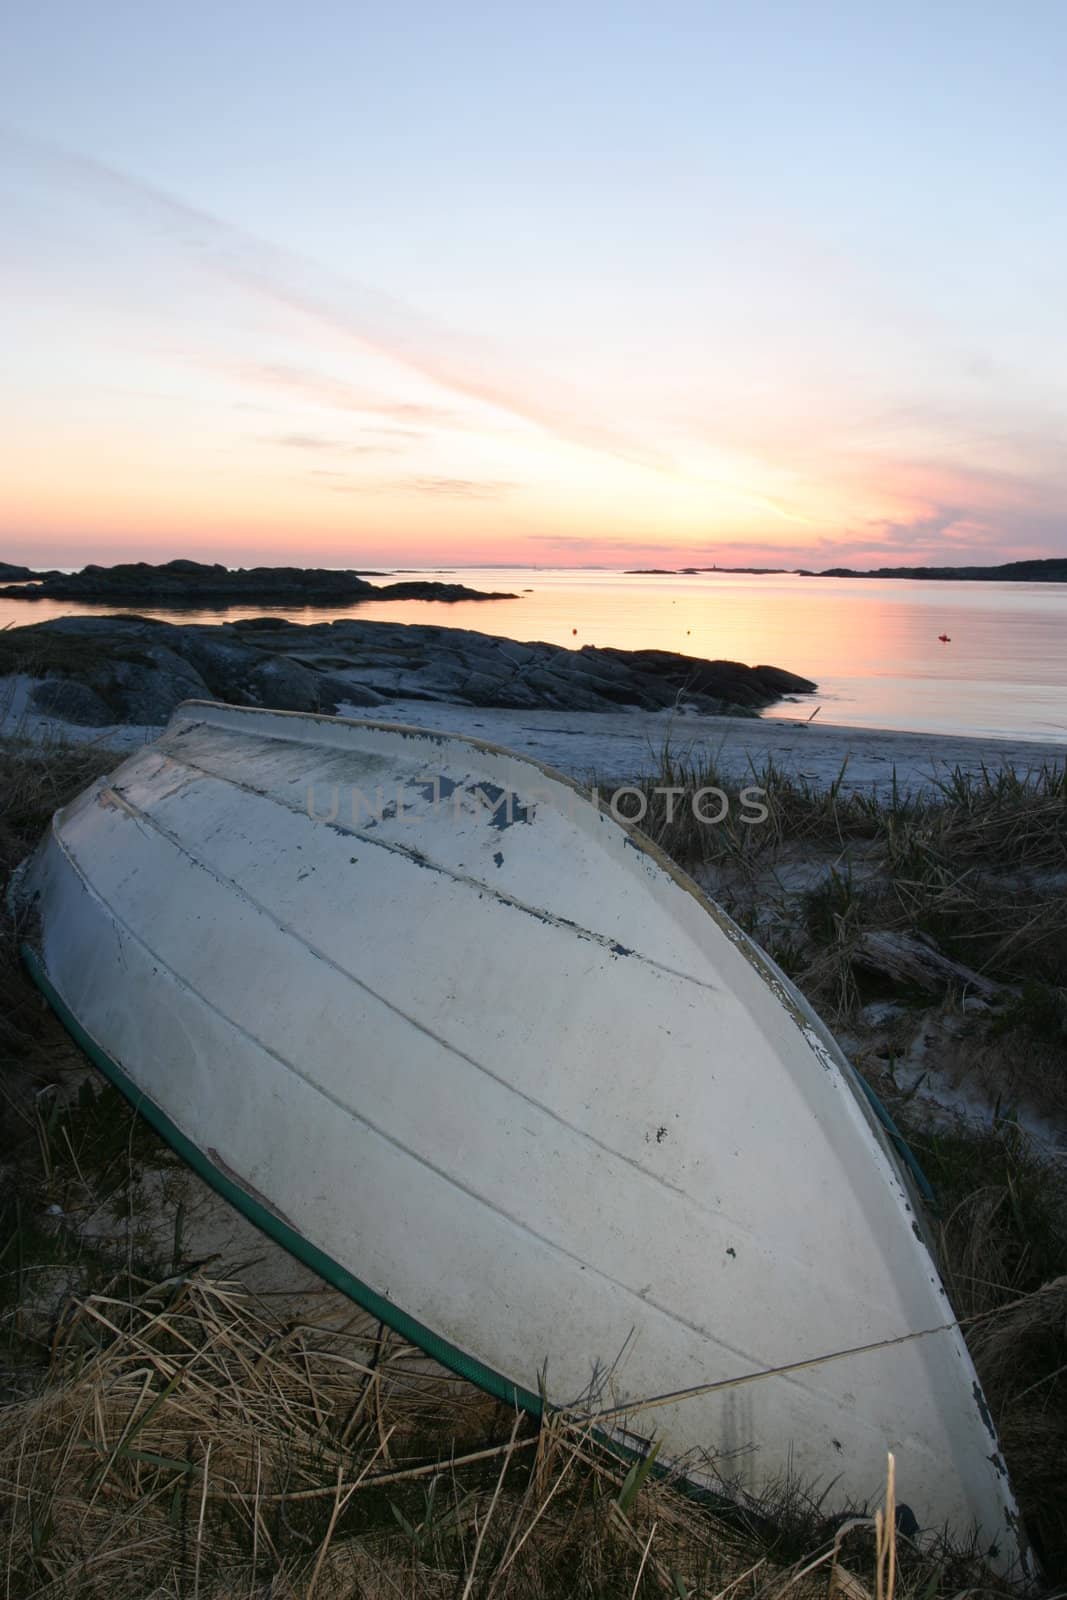 Rowboat at the beach by Einar